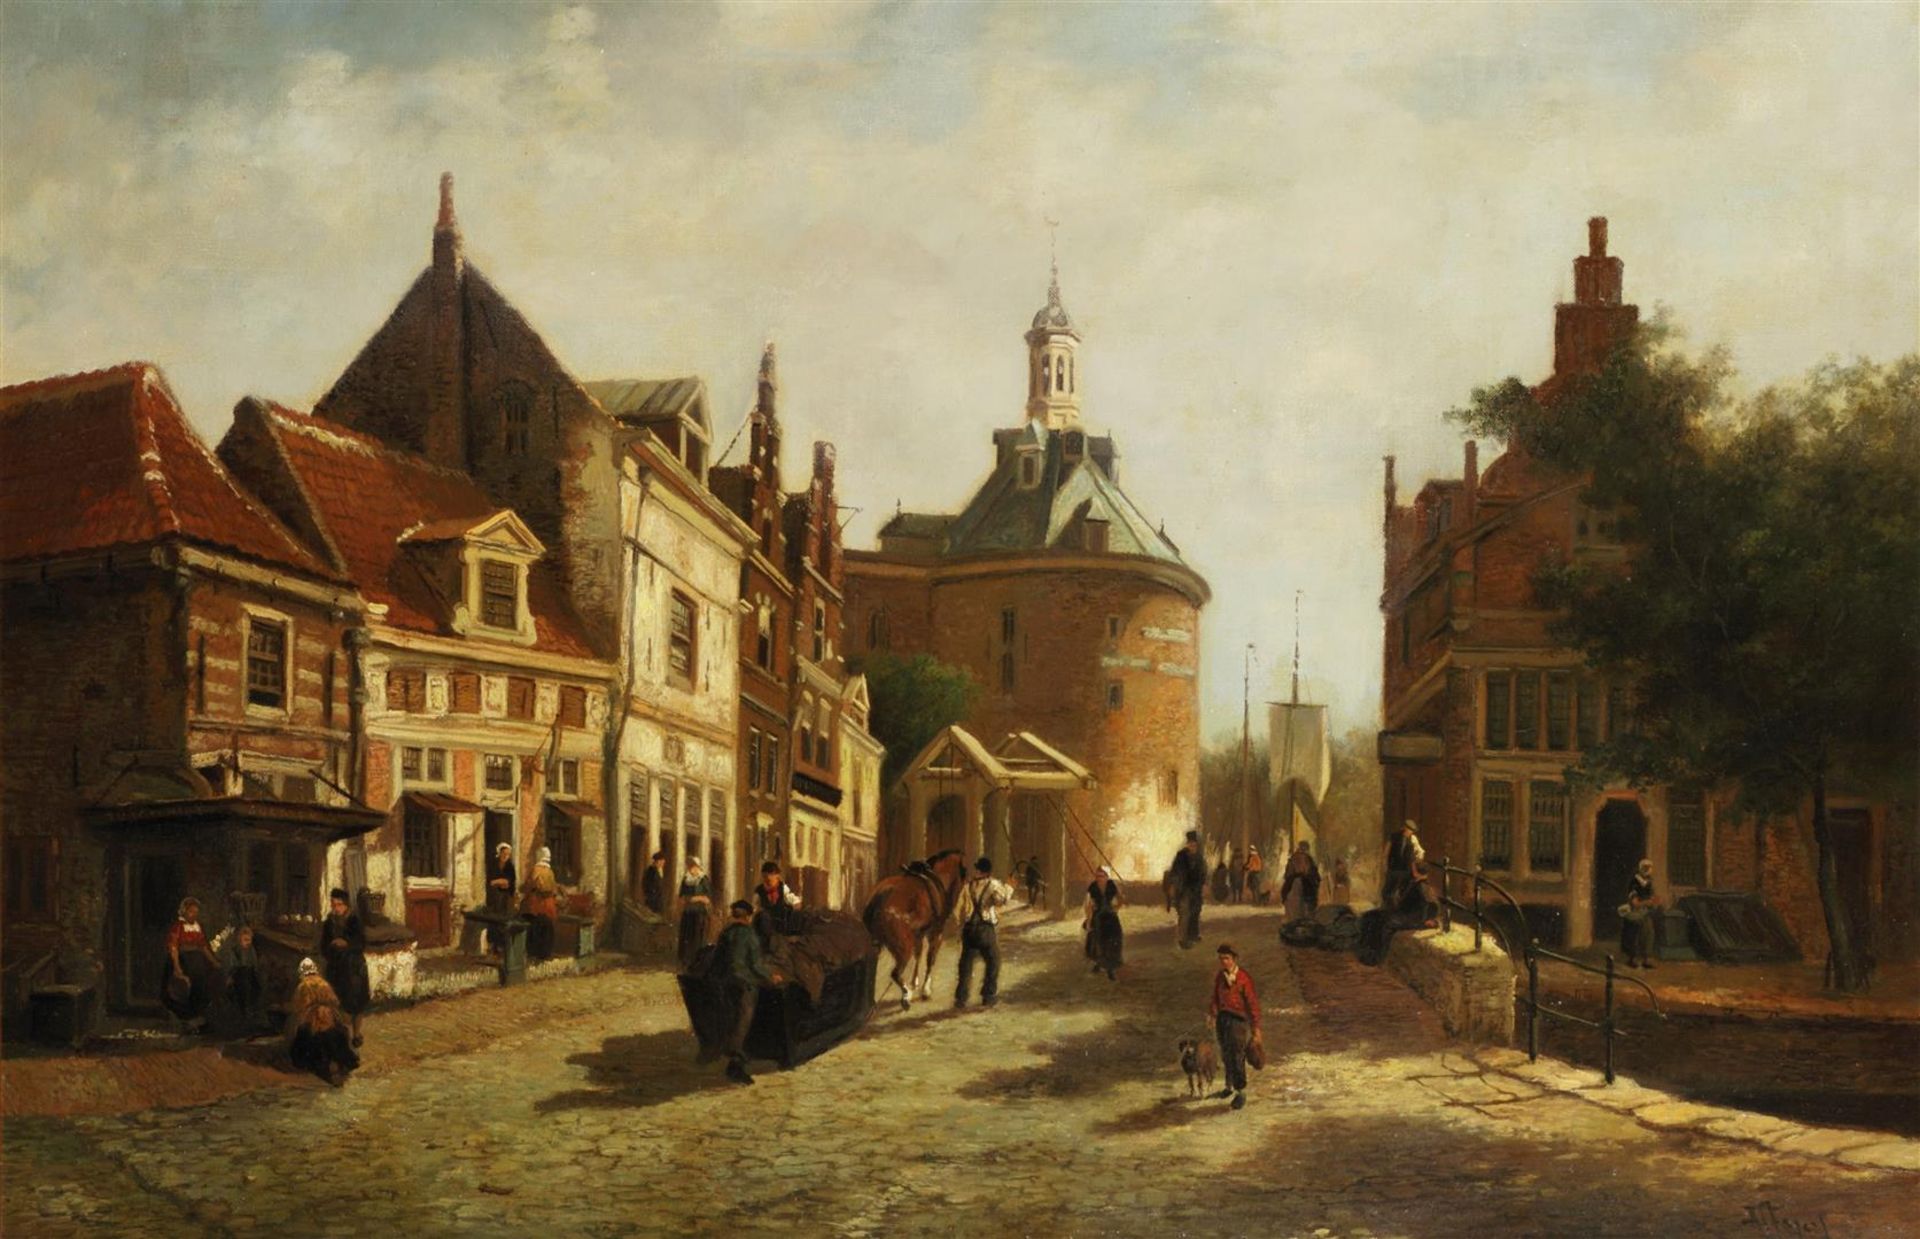 A copy after Cornelis Springer, ca. 1970. View of Enkhuizen